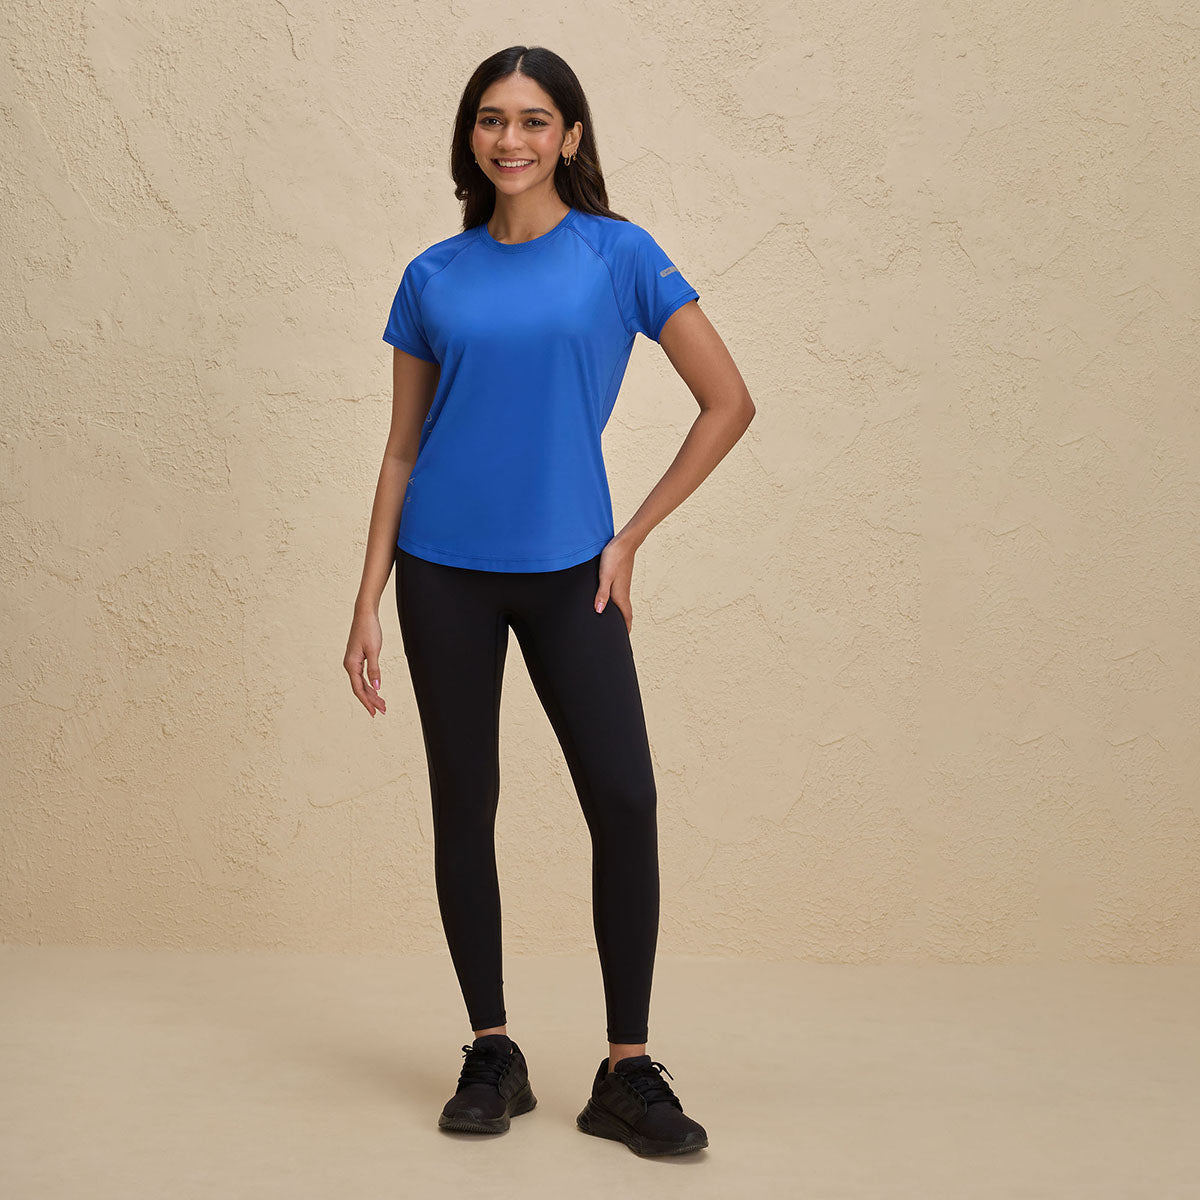 Nykd By Nykaa Half Sleeves Regular Fit Quick Dry Running Fitness Sports Tee-NYK033-Bright Blue